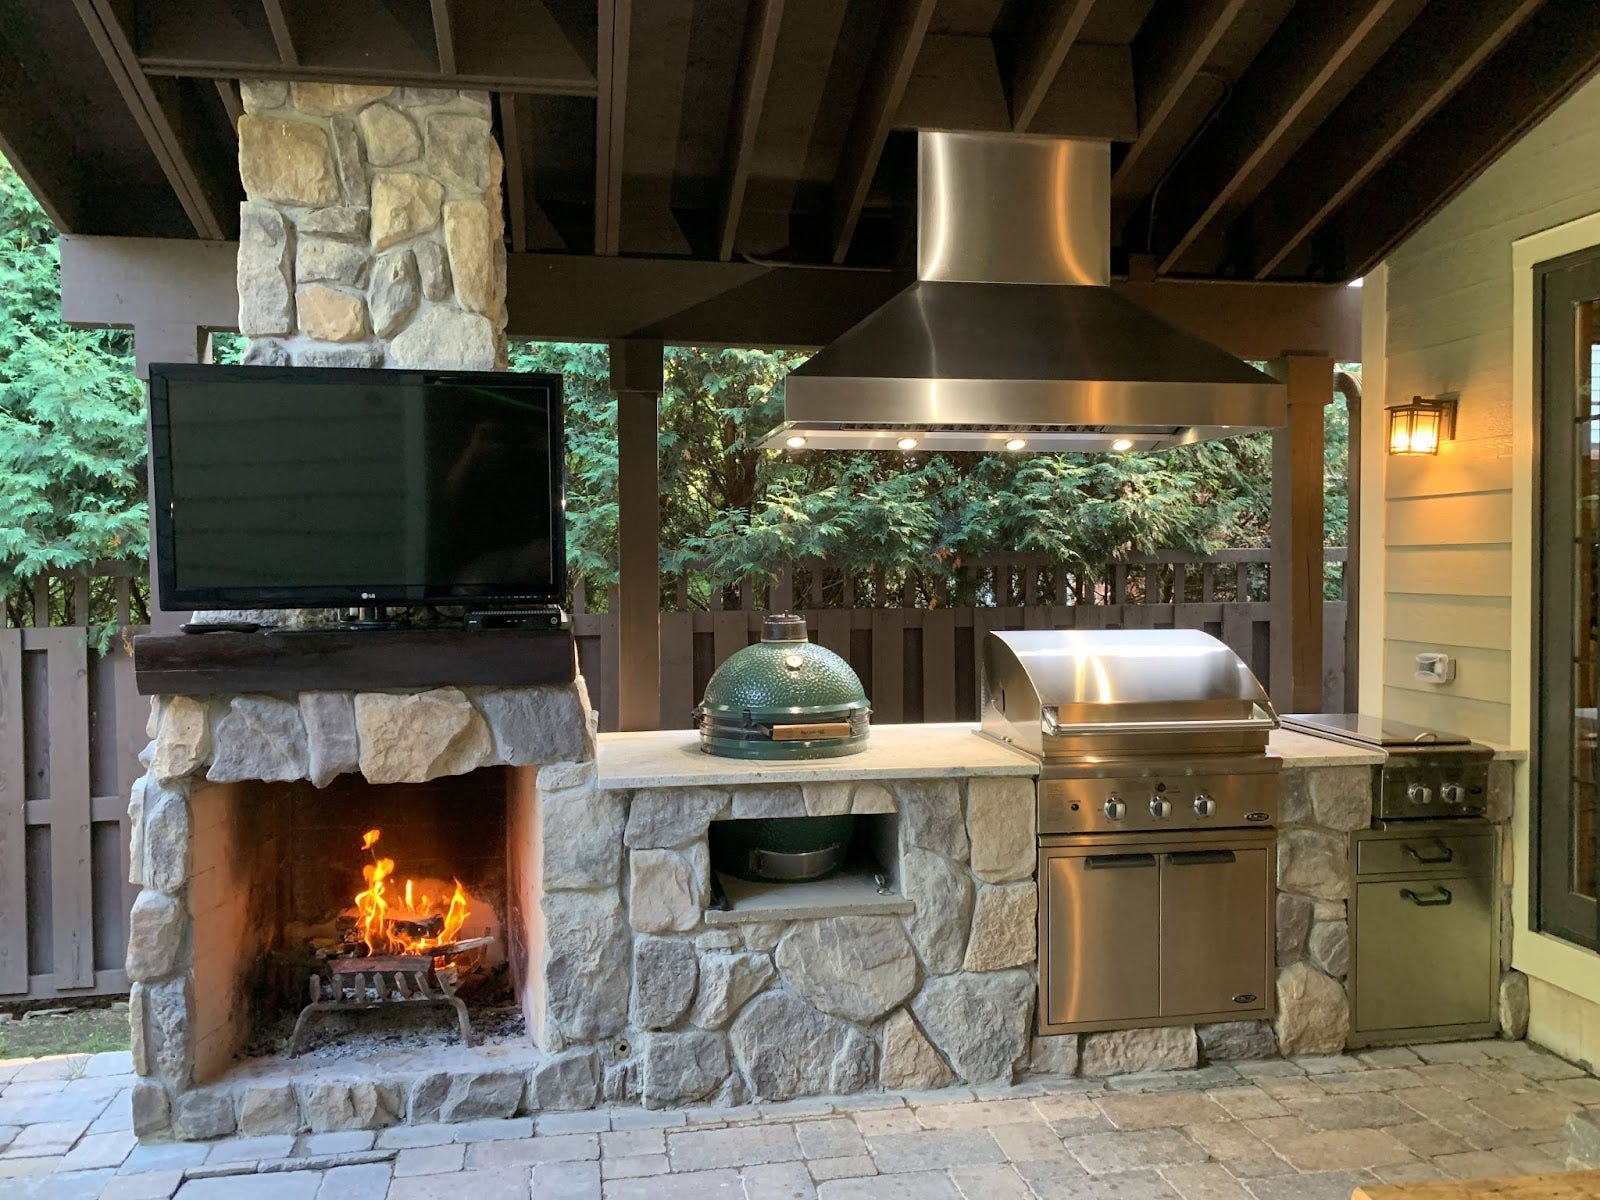 Cozy outdoor patio featuring a stone fireplace with a roaring fire, a modern grill, and a TV for entertainment. - Proline Range Hoods - prolinerangehoods.com 